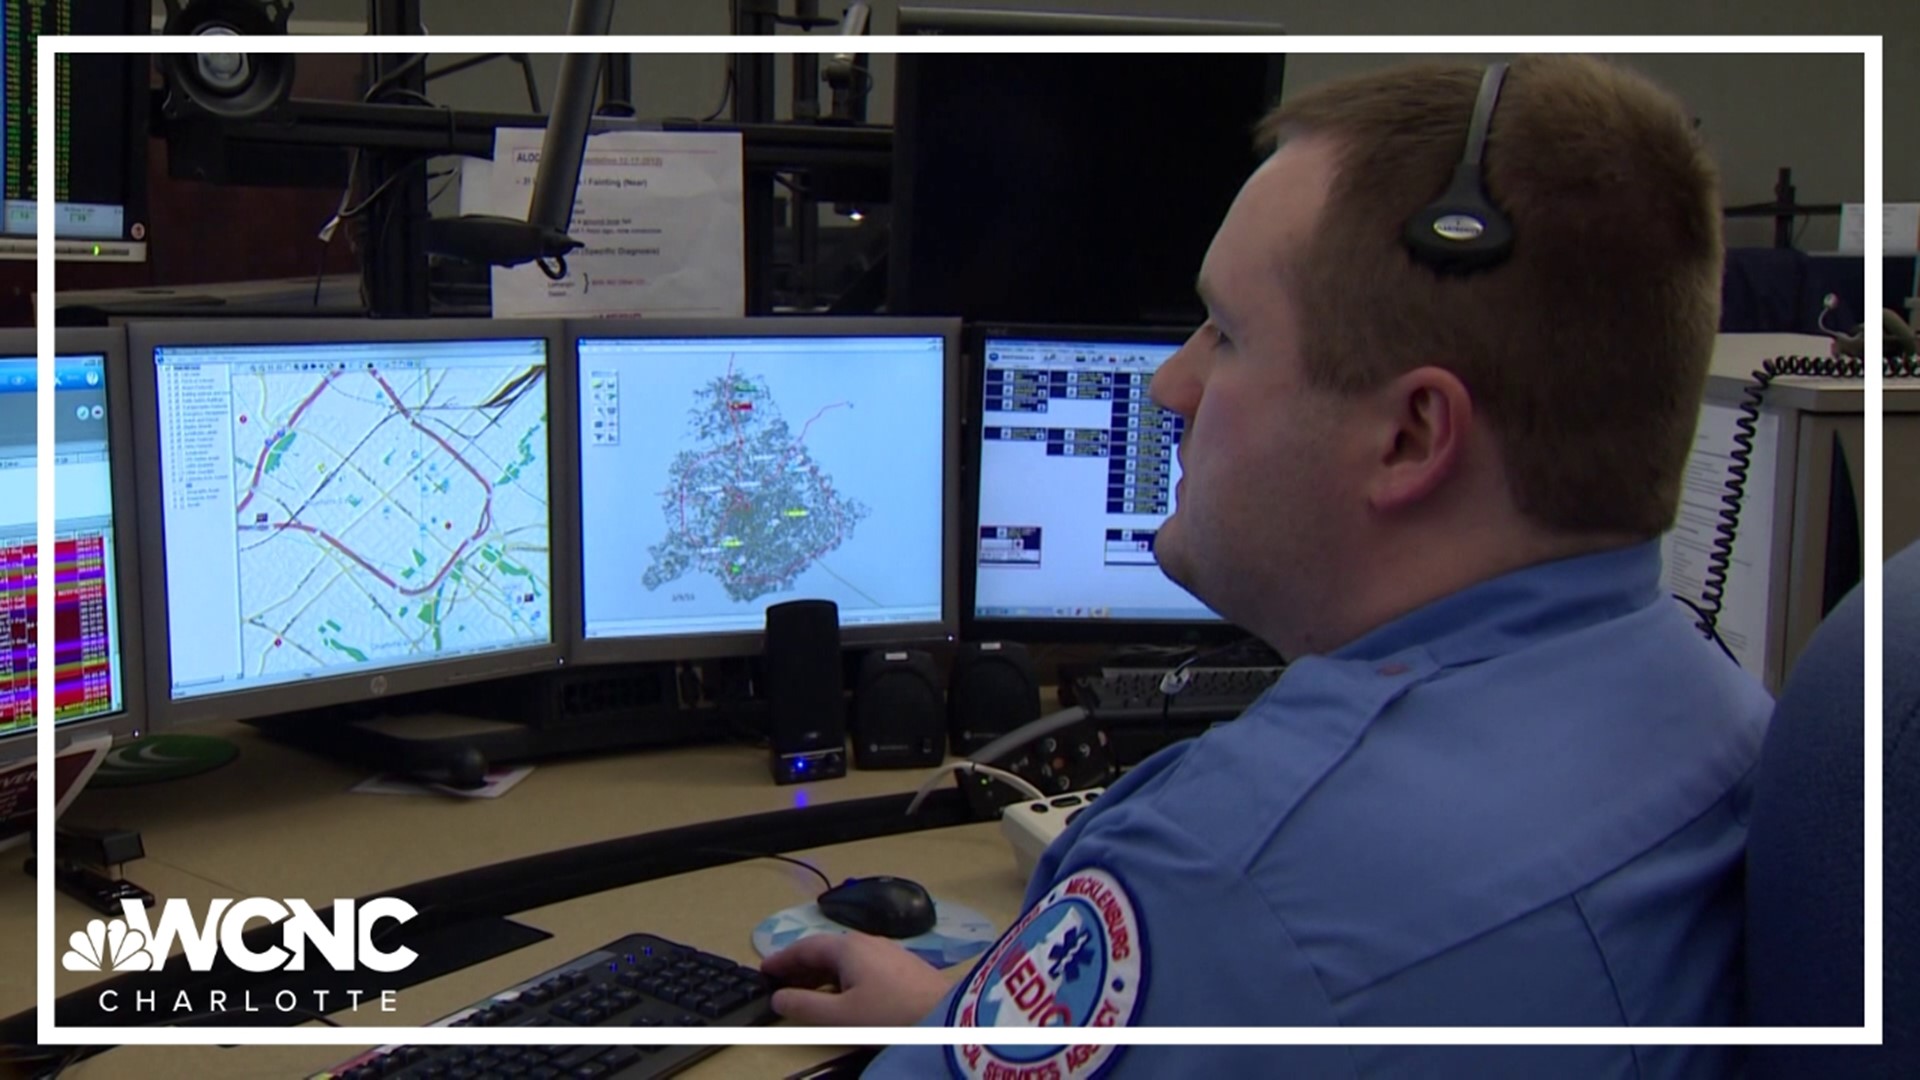 In April, Medic changed how it responds to 911 calls, reserving the use of lights and sirens for serious emergency calls.